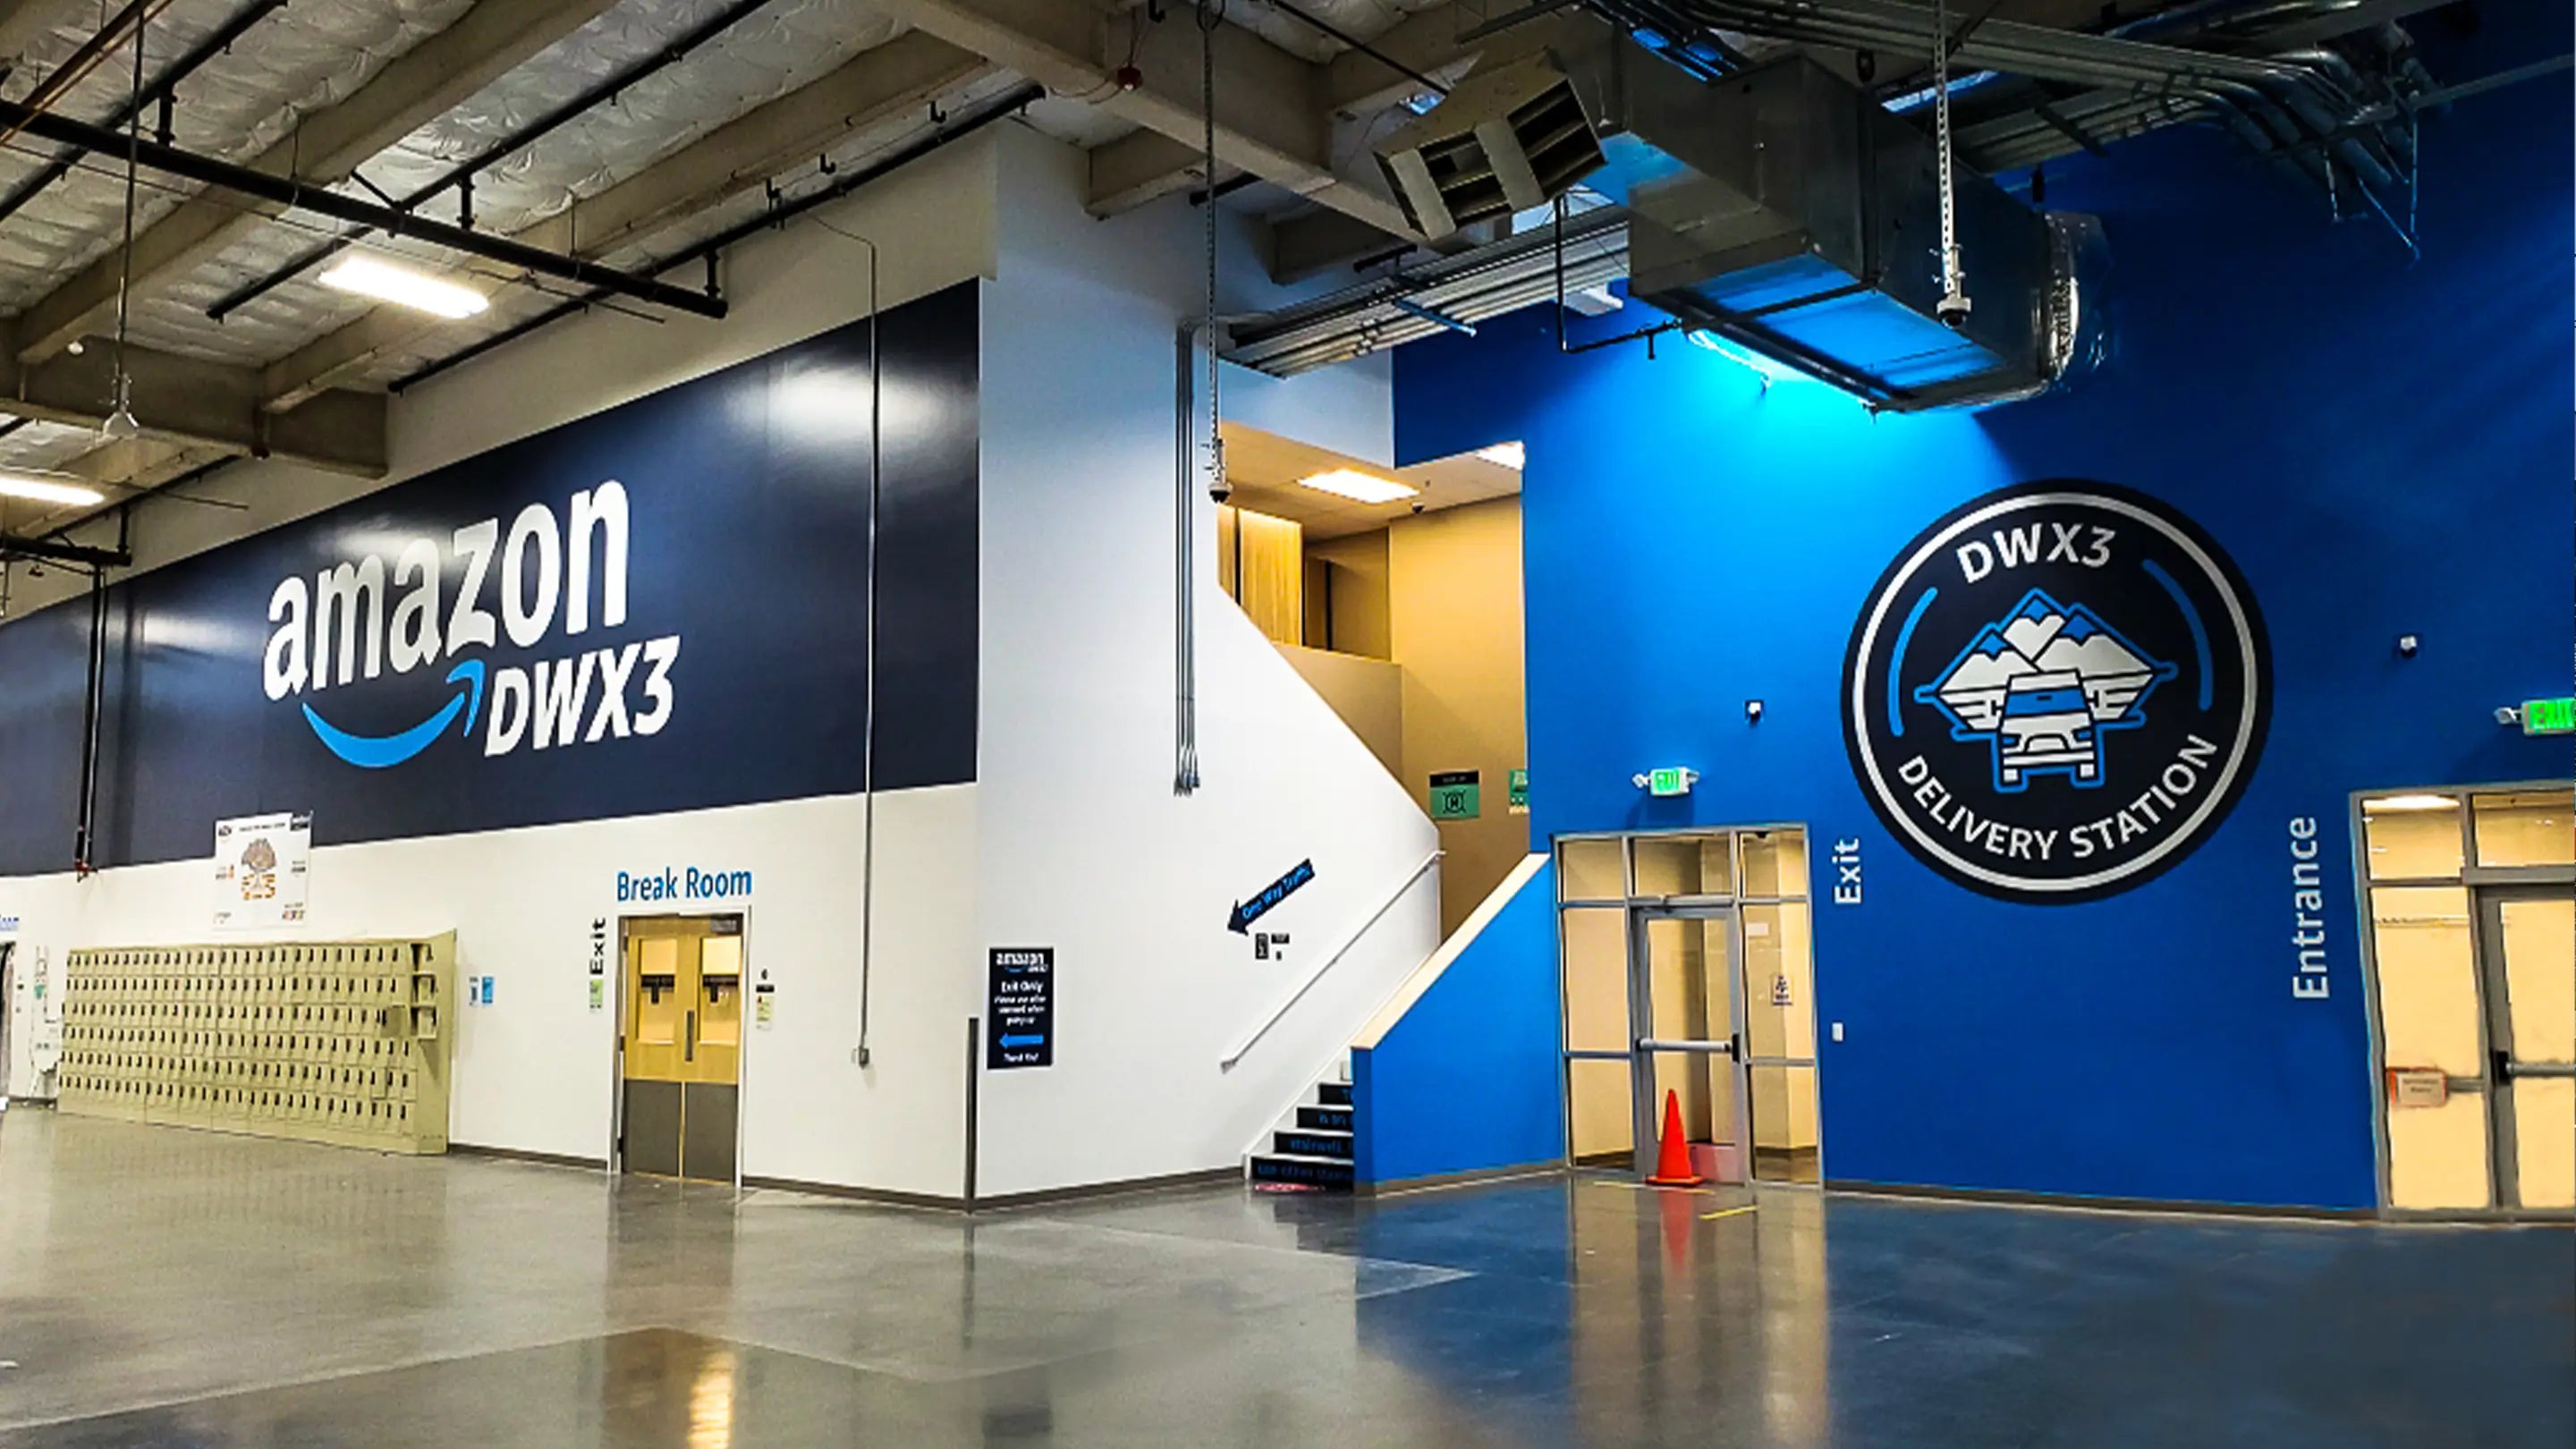 Large custom printed wall wrap we did at Amazon's DWX3 facility in Seattle, WA